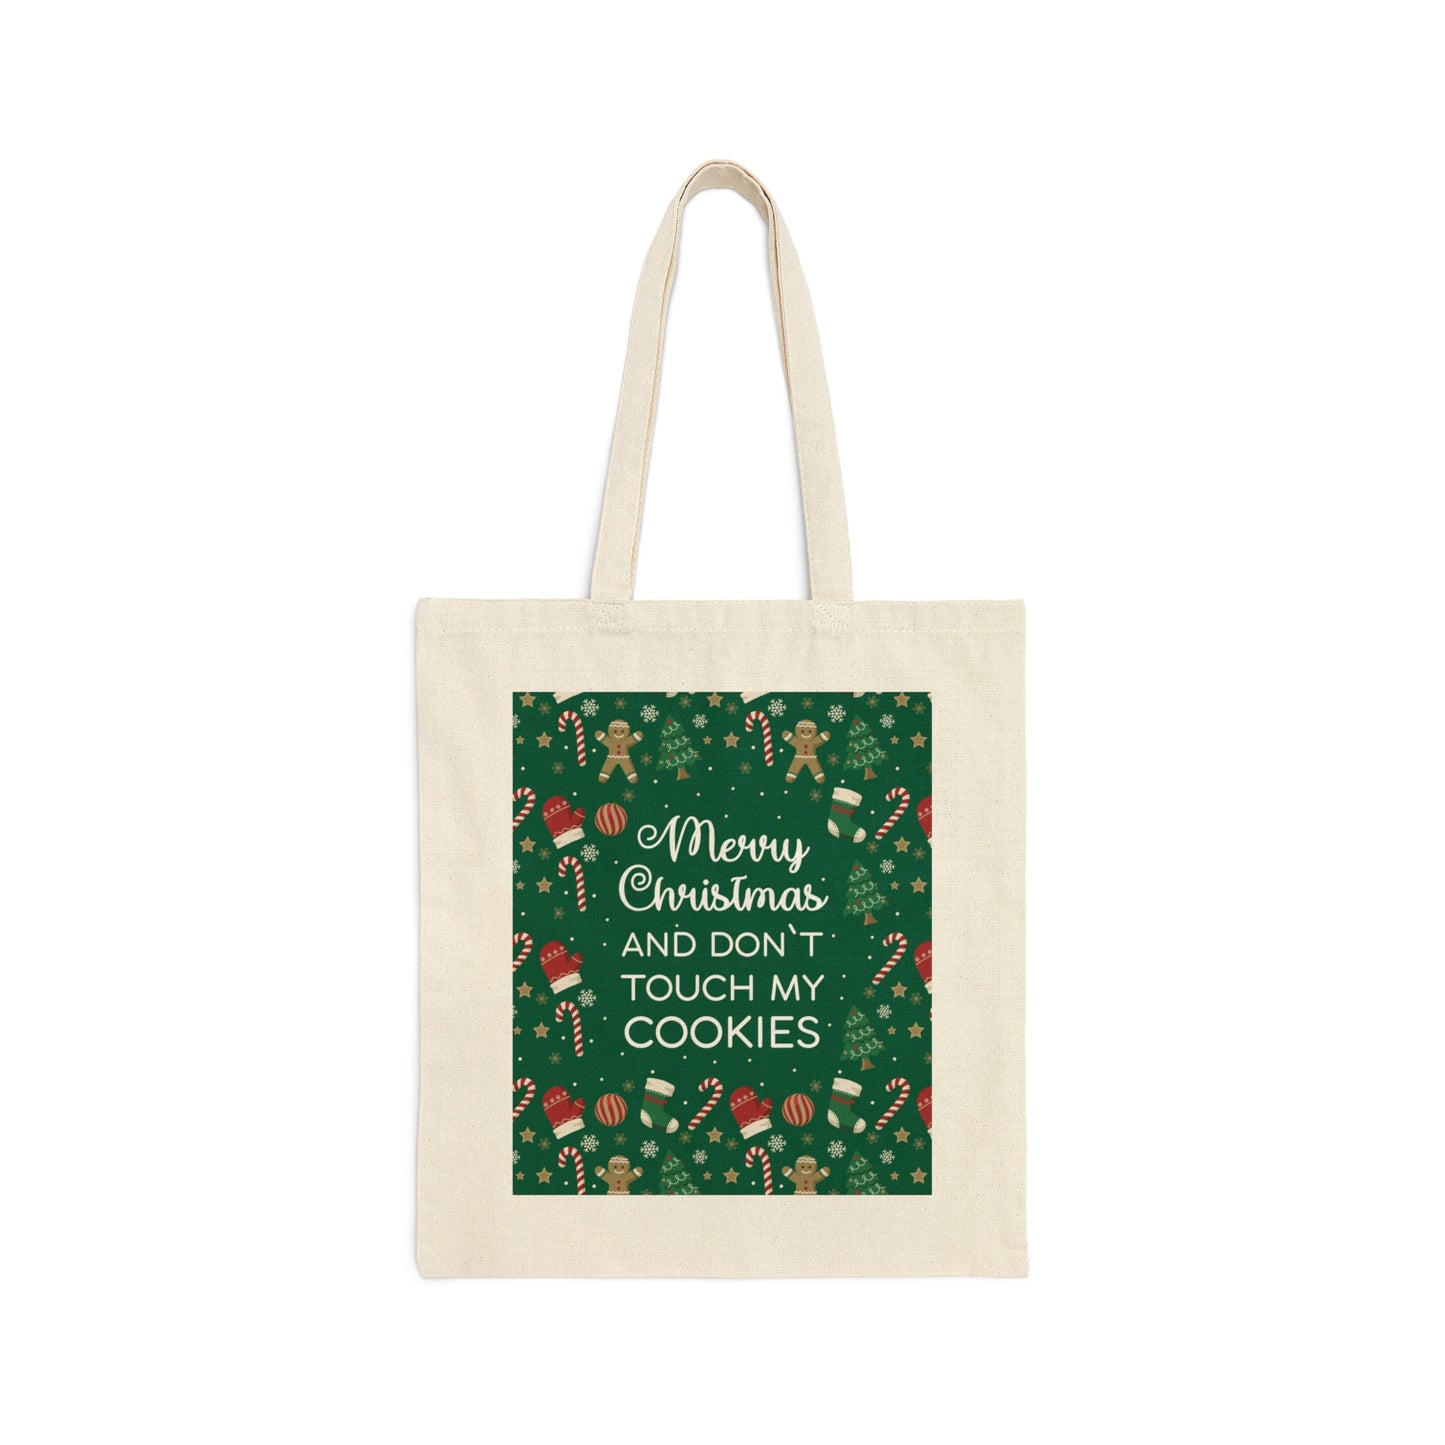 Merry Christmas and Don't Touch my Cookies Quotes Canvas Shopping Cotton Tote Bag